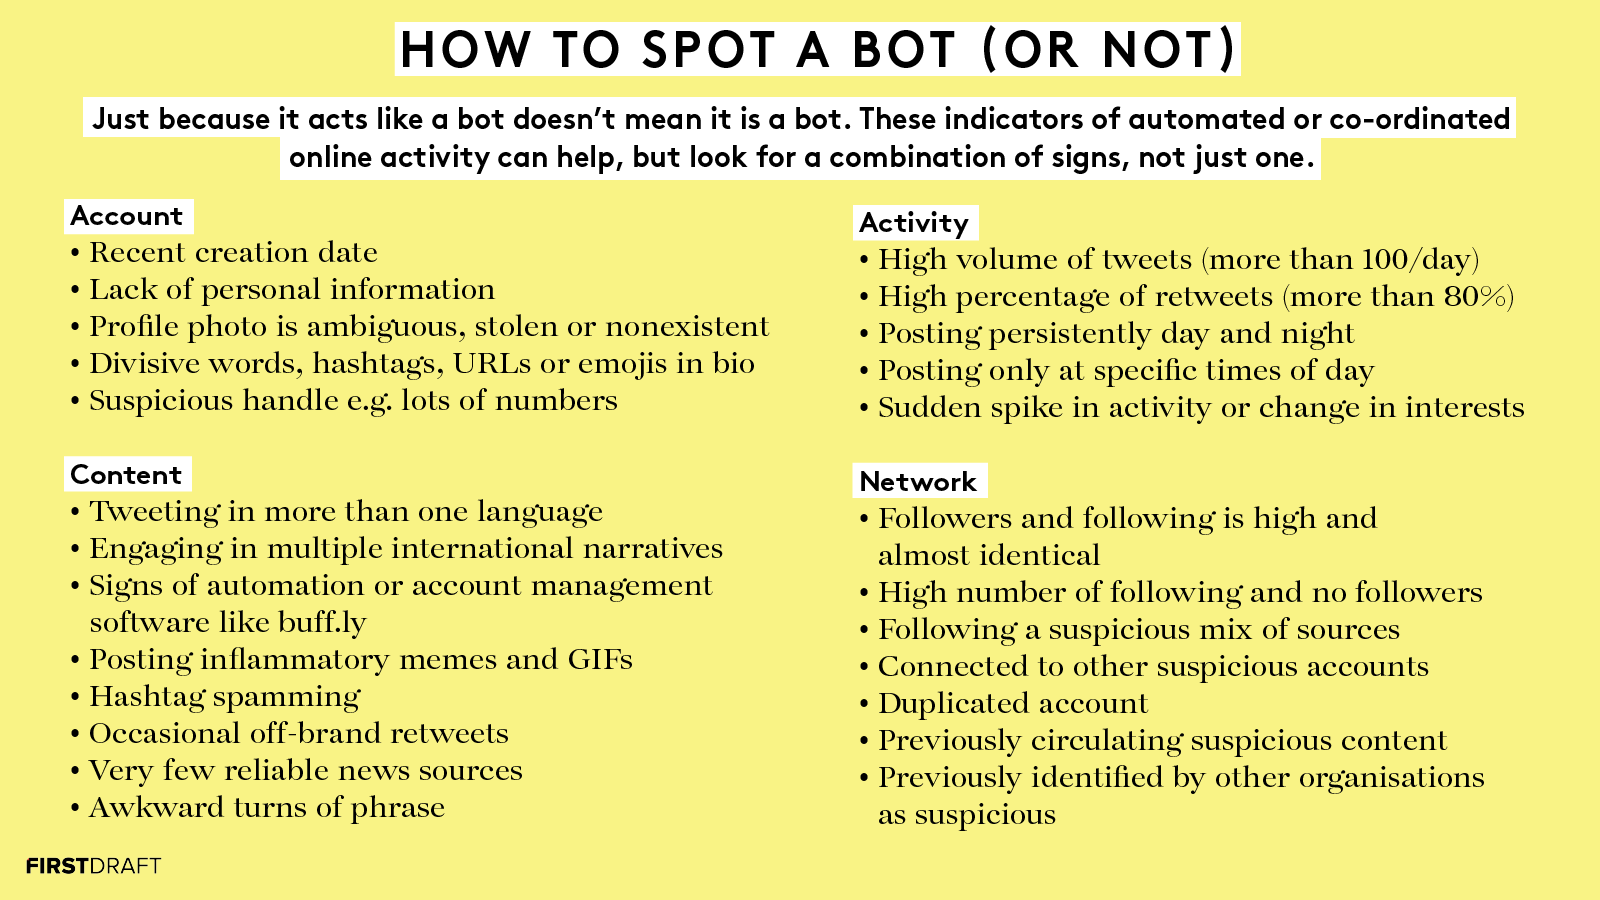 How to spot a bot (or not): The main indicators of online automation,  co-ordination and inauthentic activity